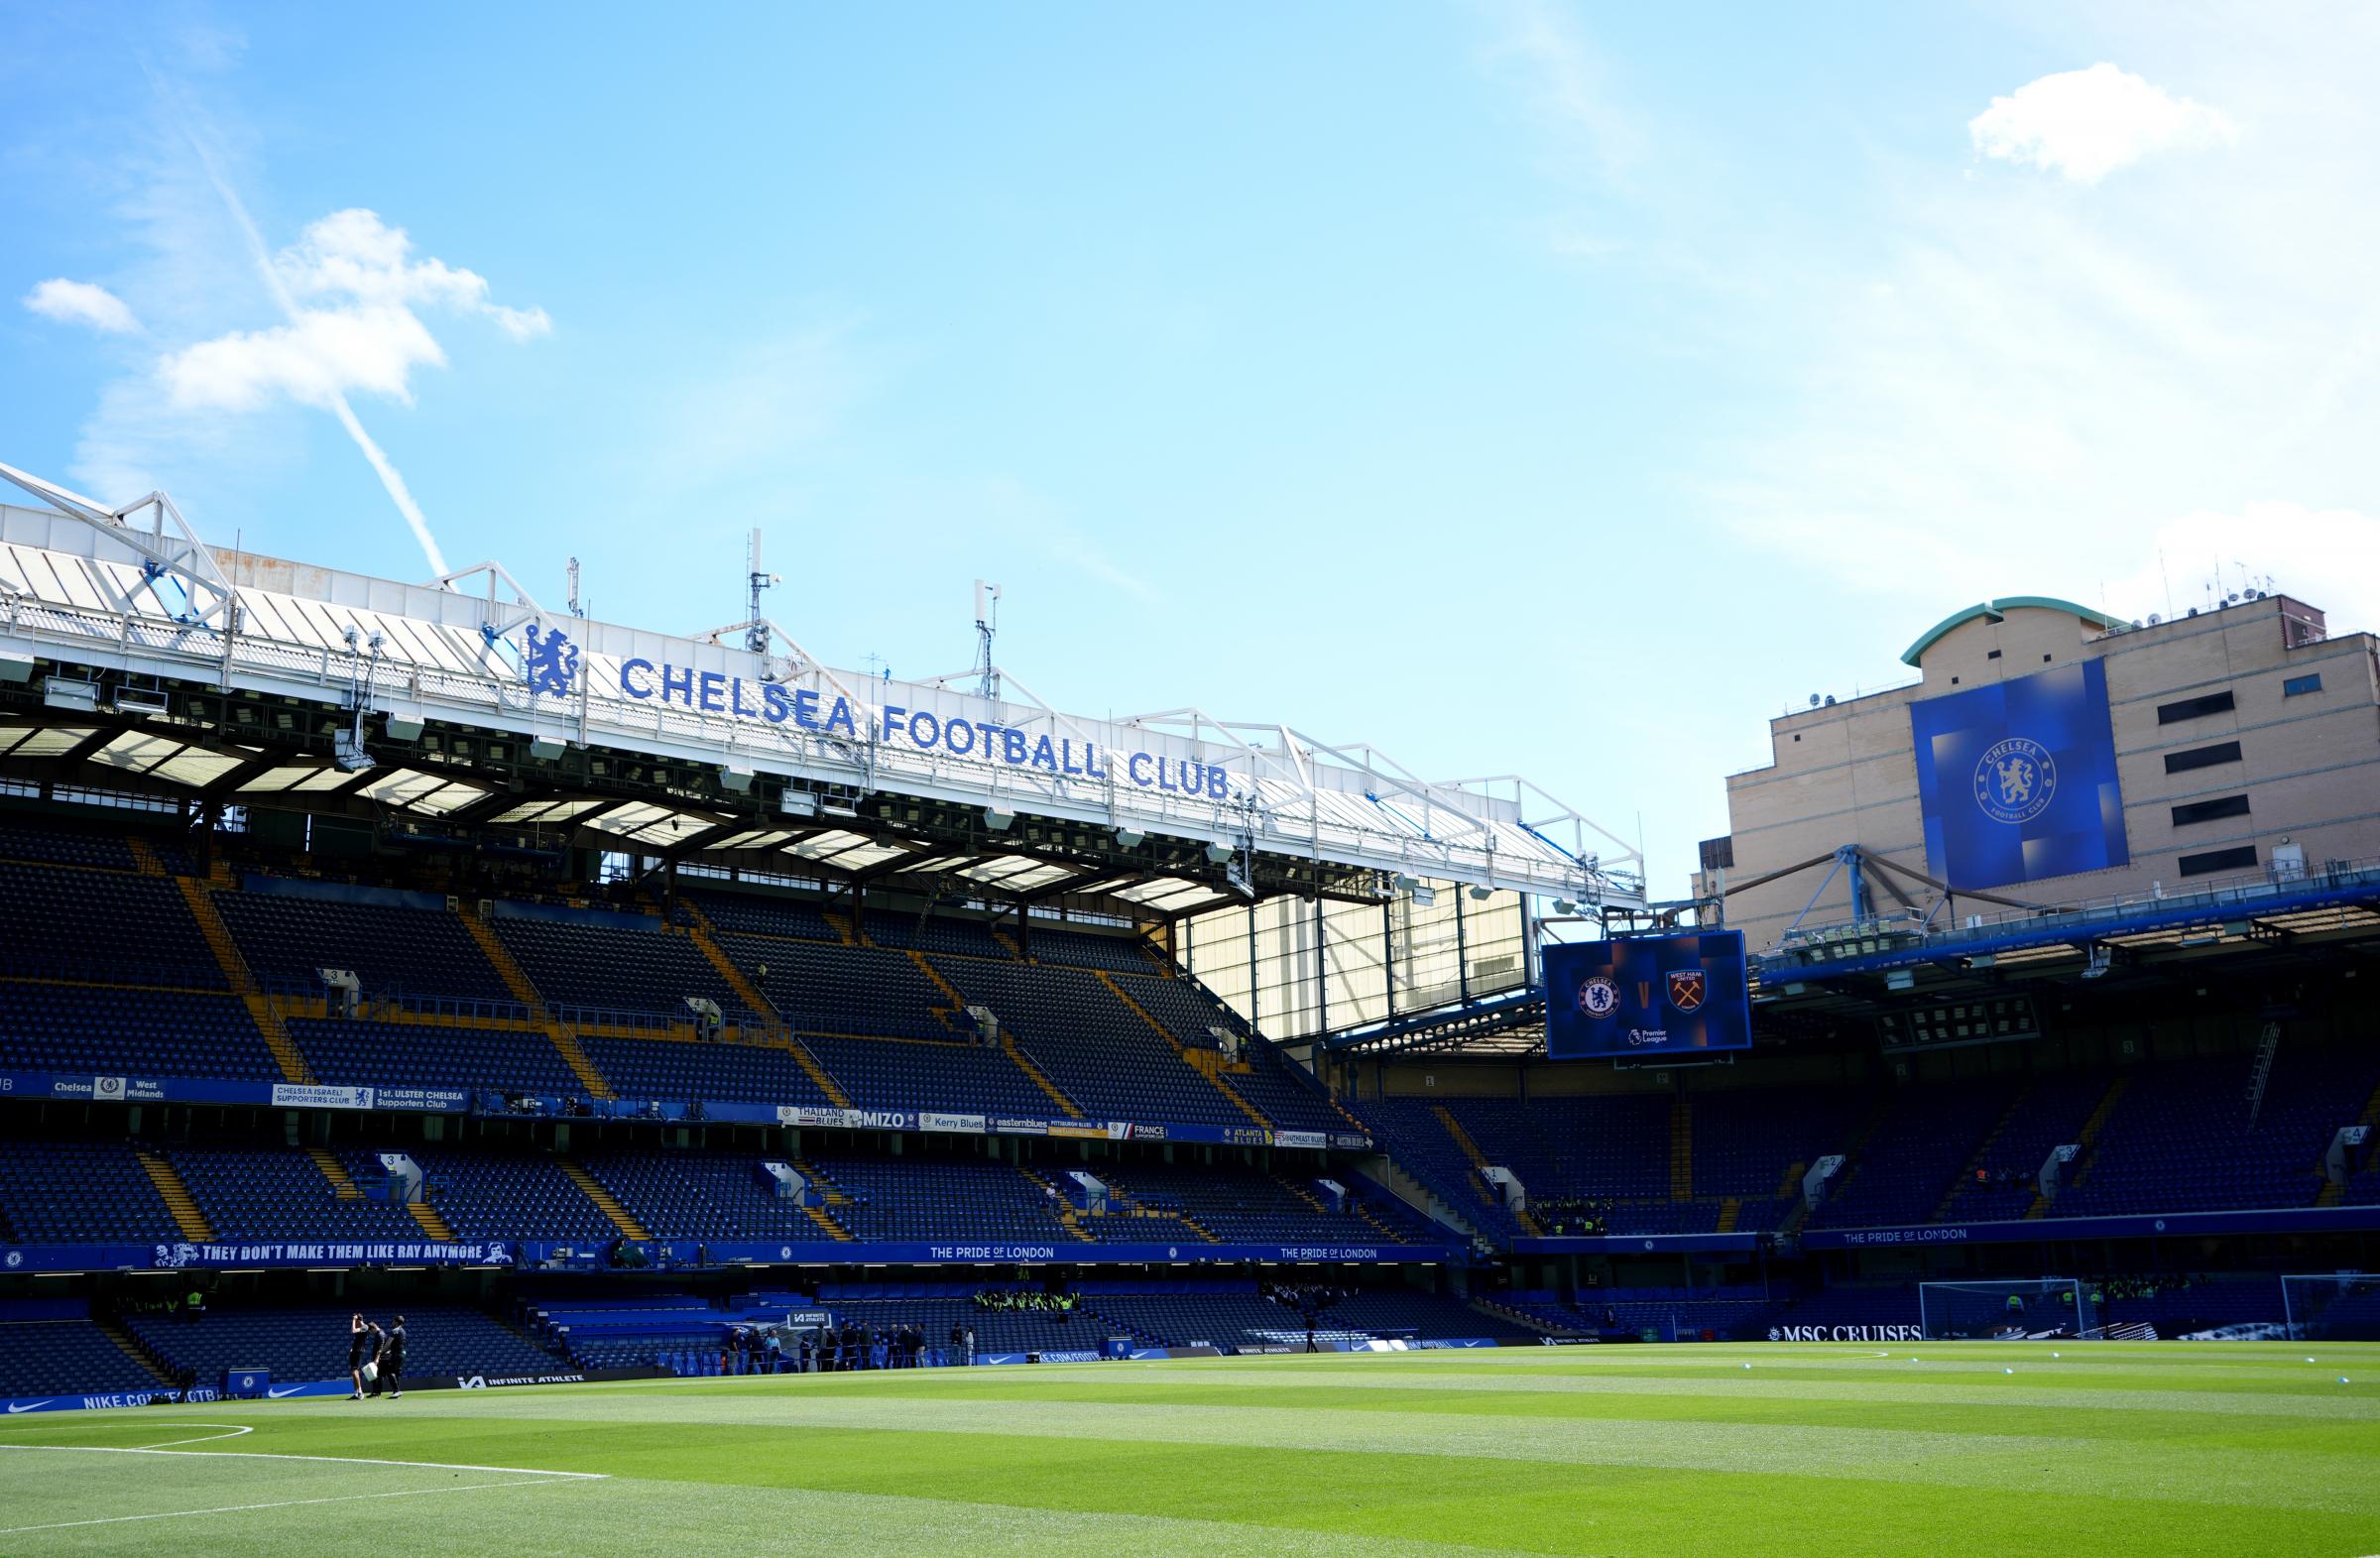 Chelsea v AFC Bournemouth to be shown on Sky Sports